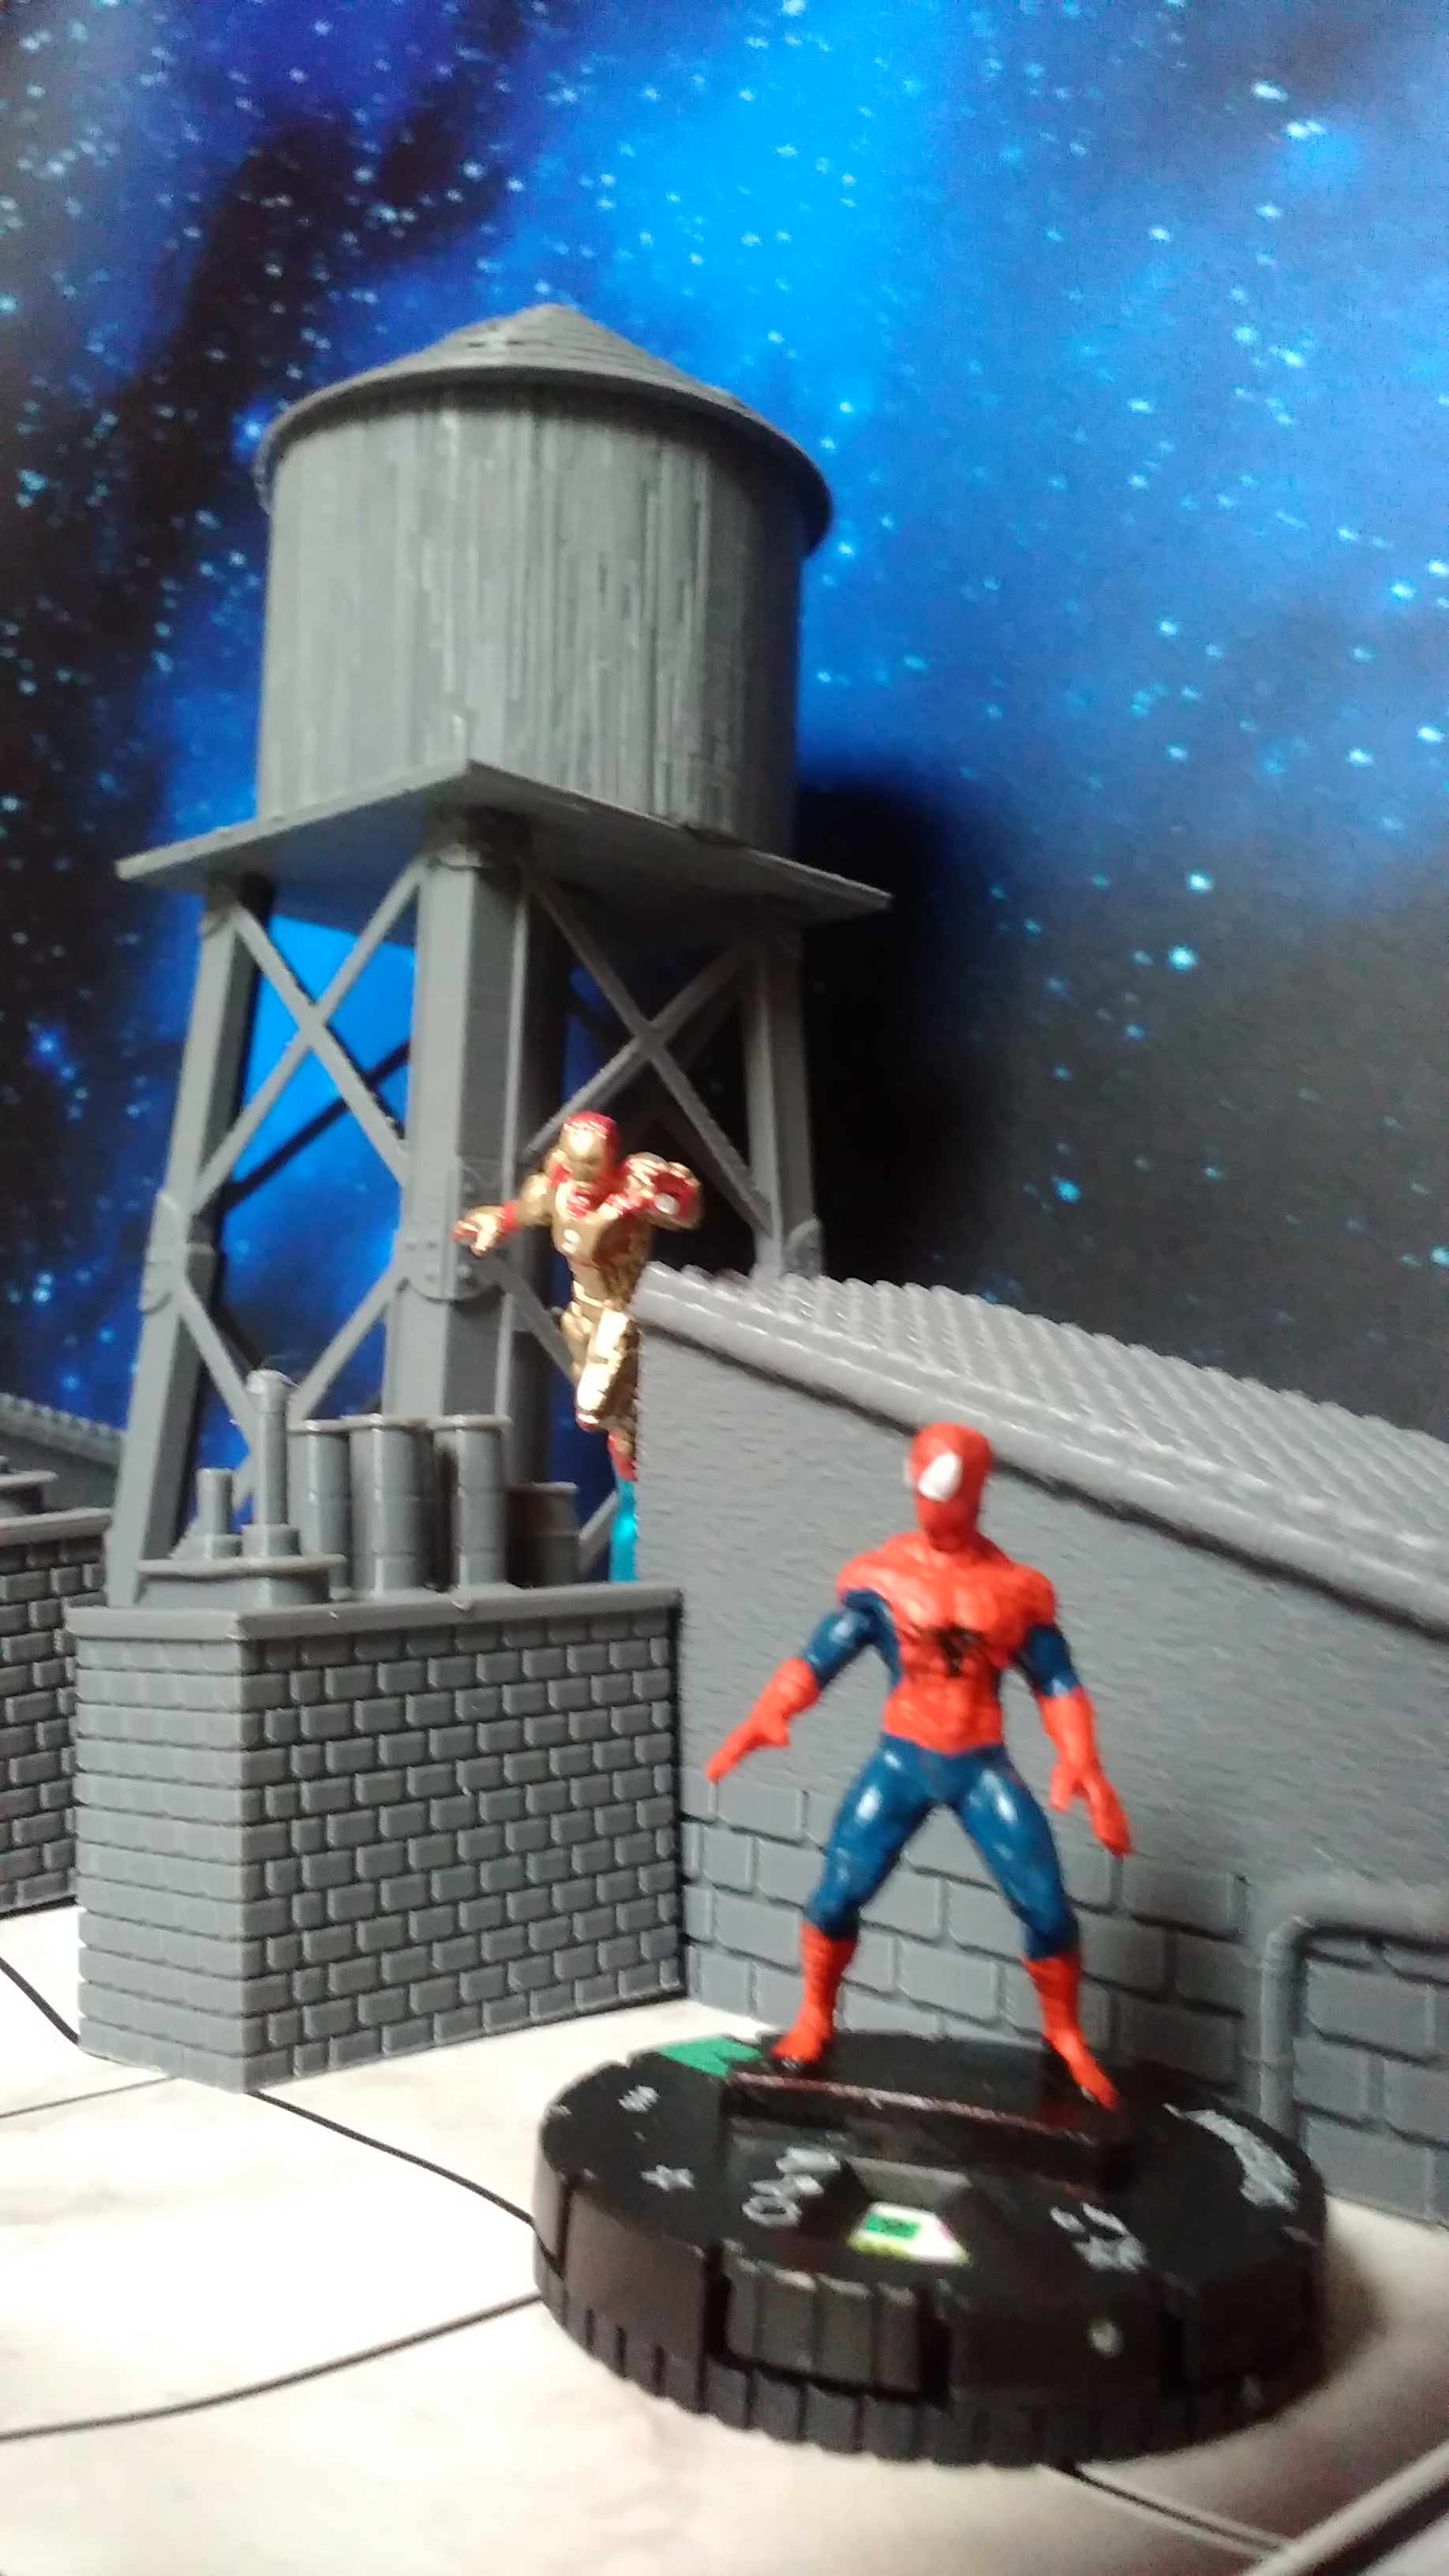 3D printed roof parts for Heroclix